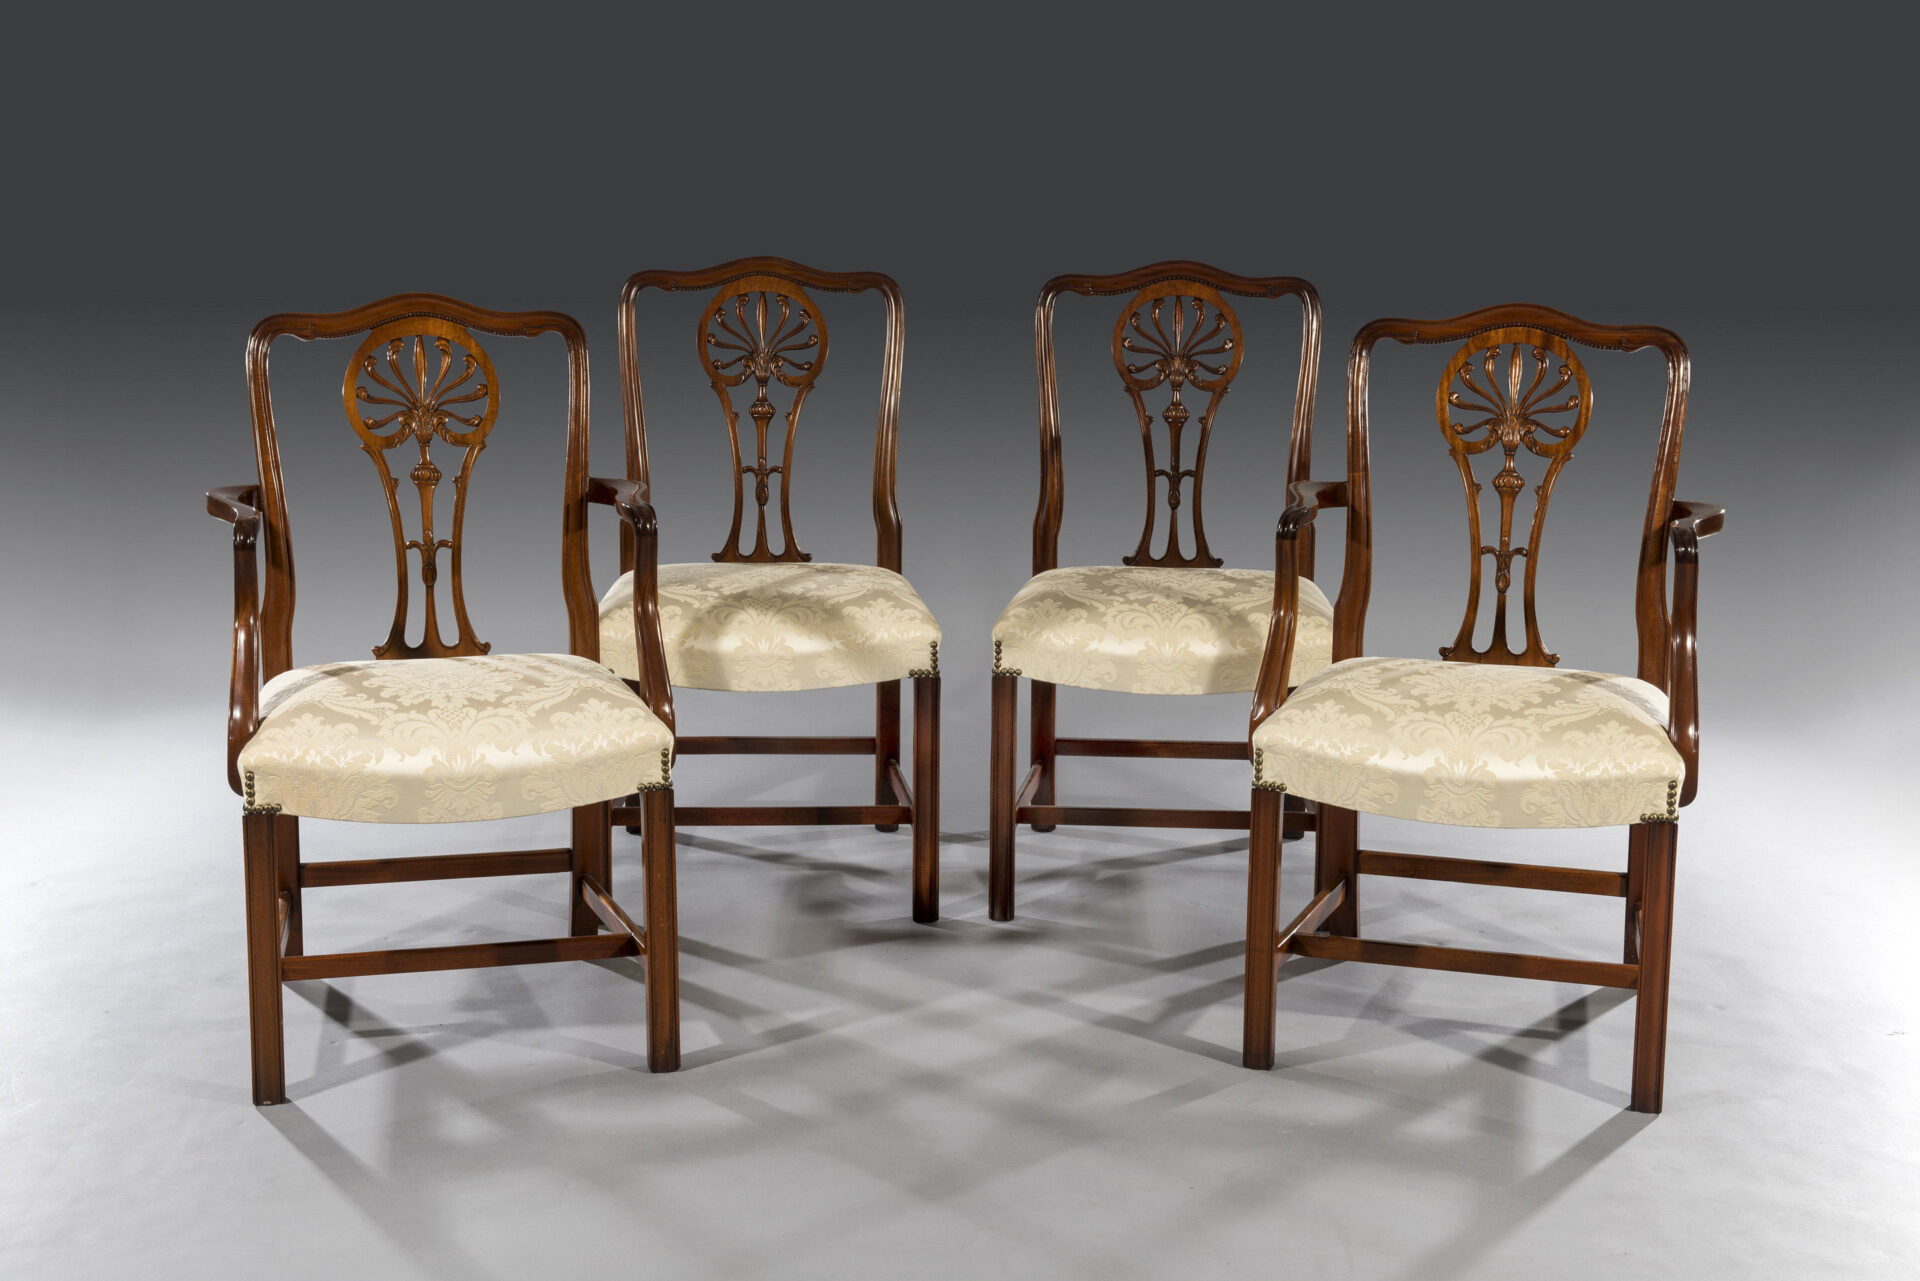 Set of Twelve High Quality Carved Mahogany Reproduction Dining Chairs ...